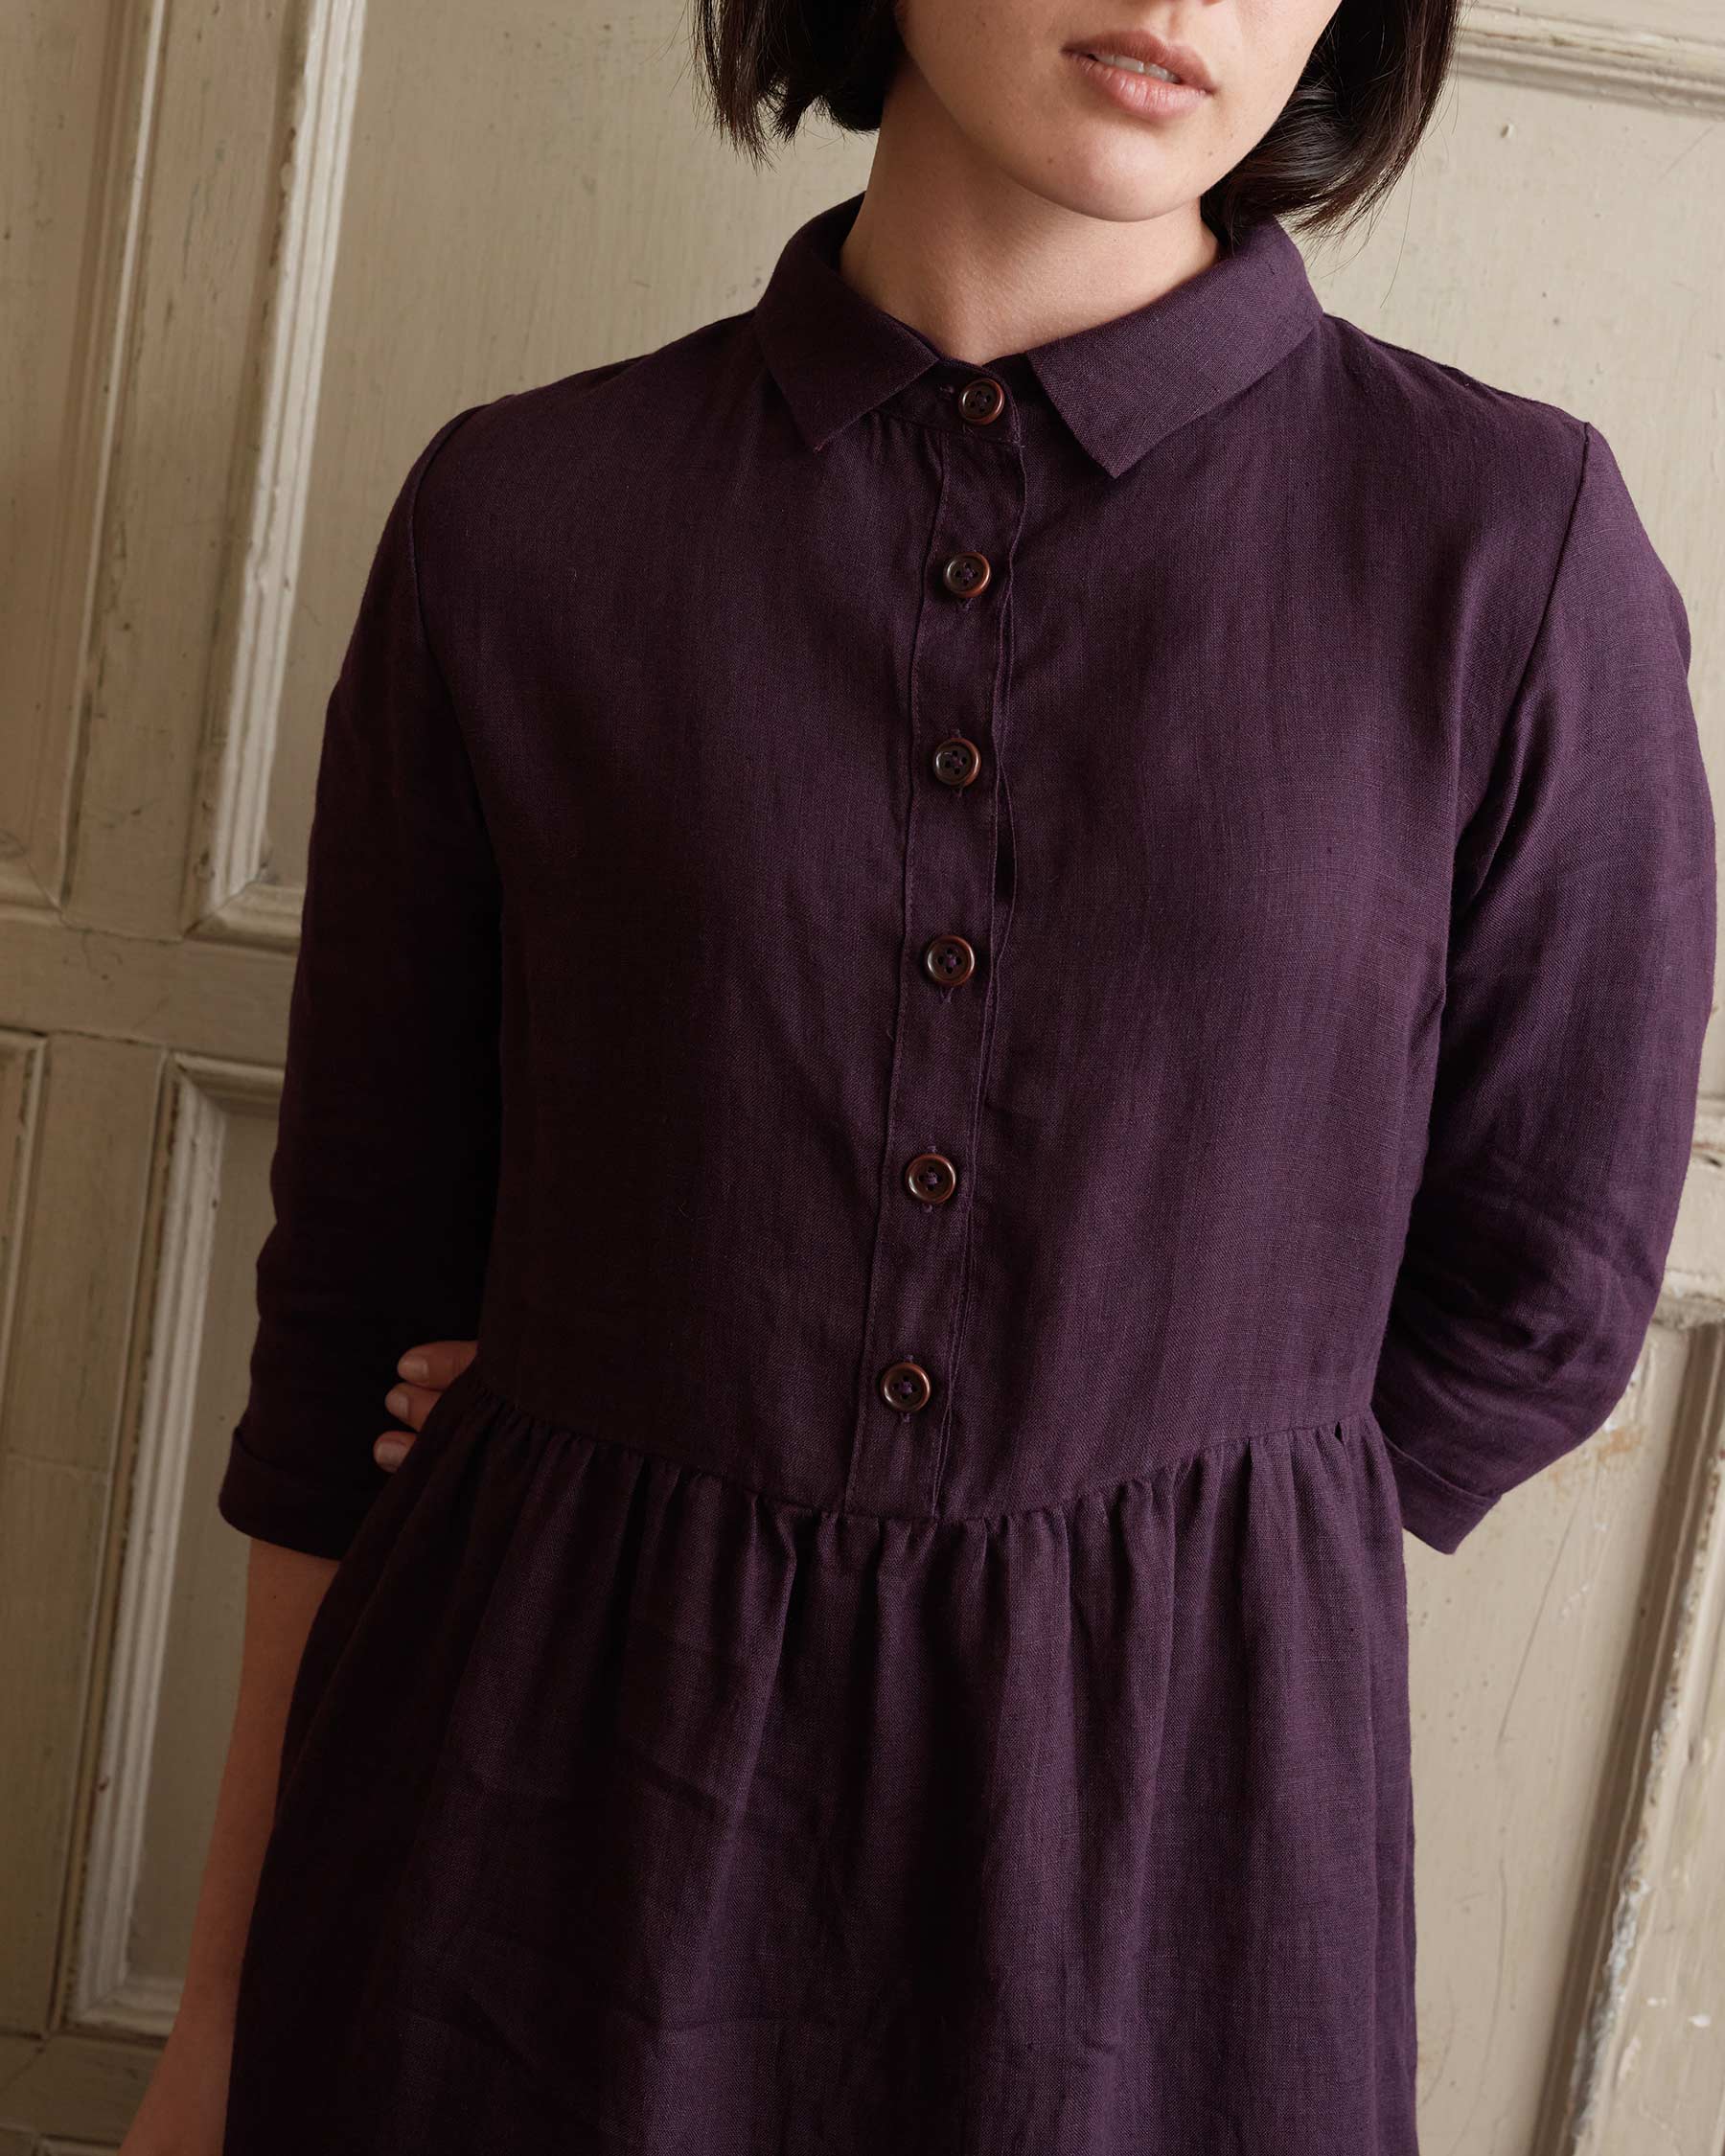 Linen dress with button closure